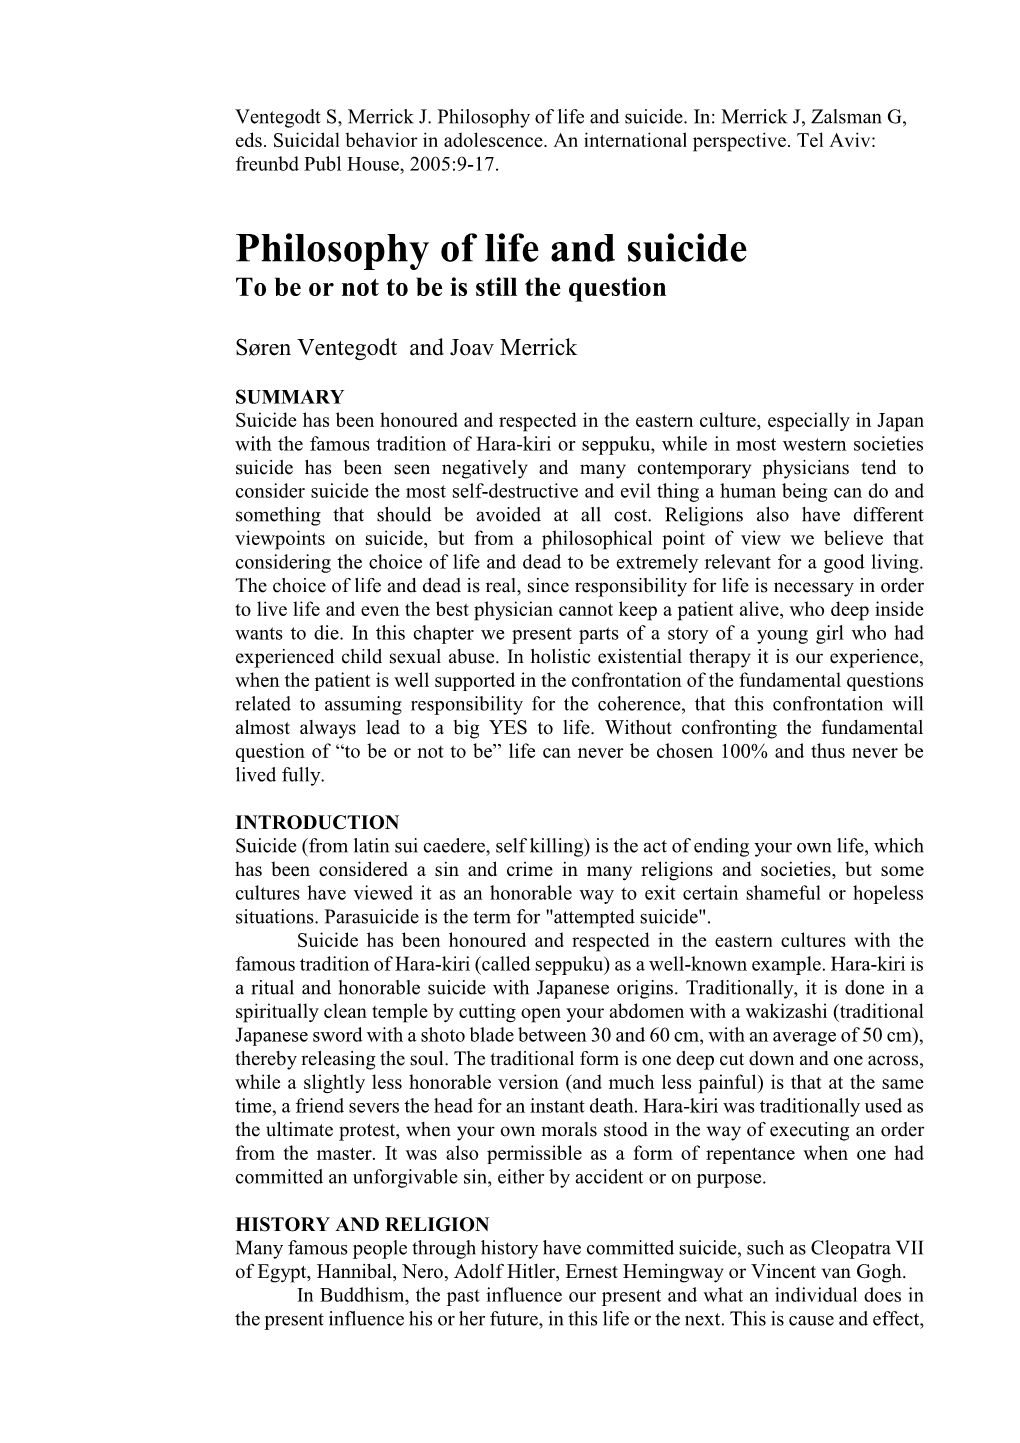 Philosophy of Life and Suicide